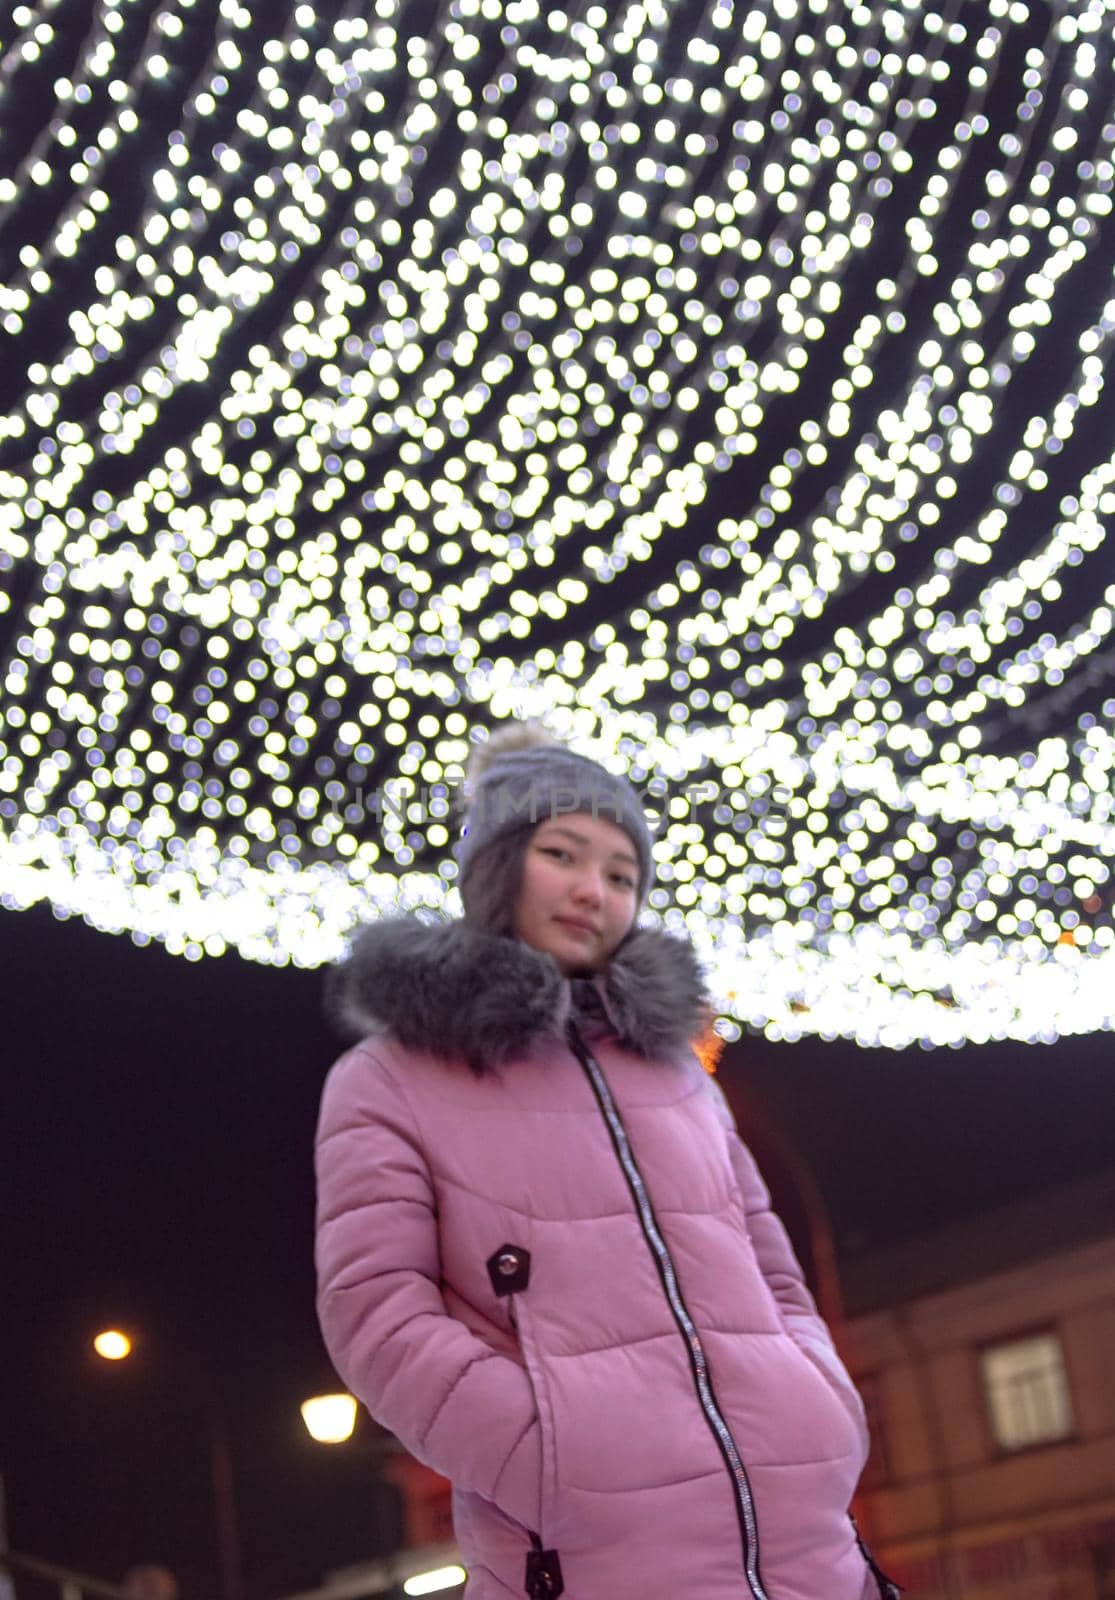 Woman on central downtown with christmas lights, sky festive illumination shine and glow, defocus image by Clara_Sh